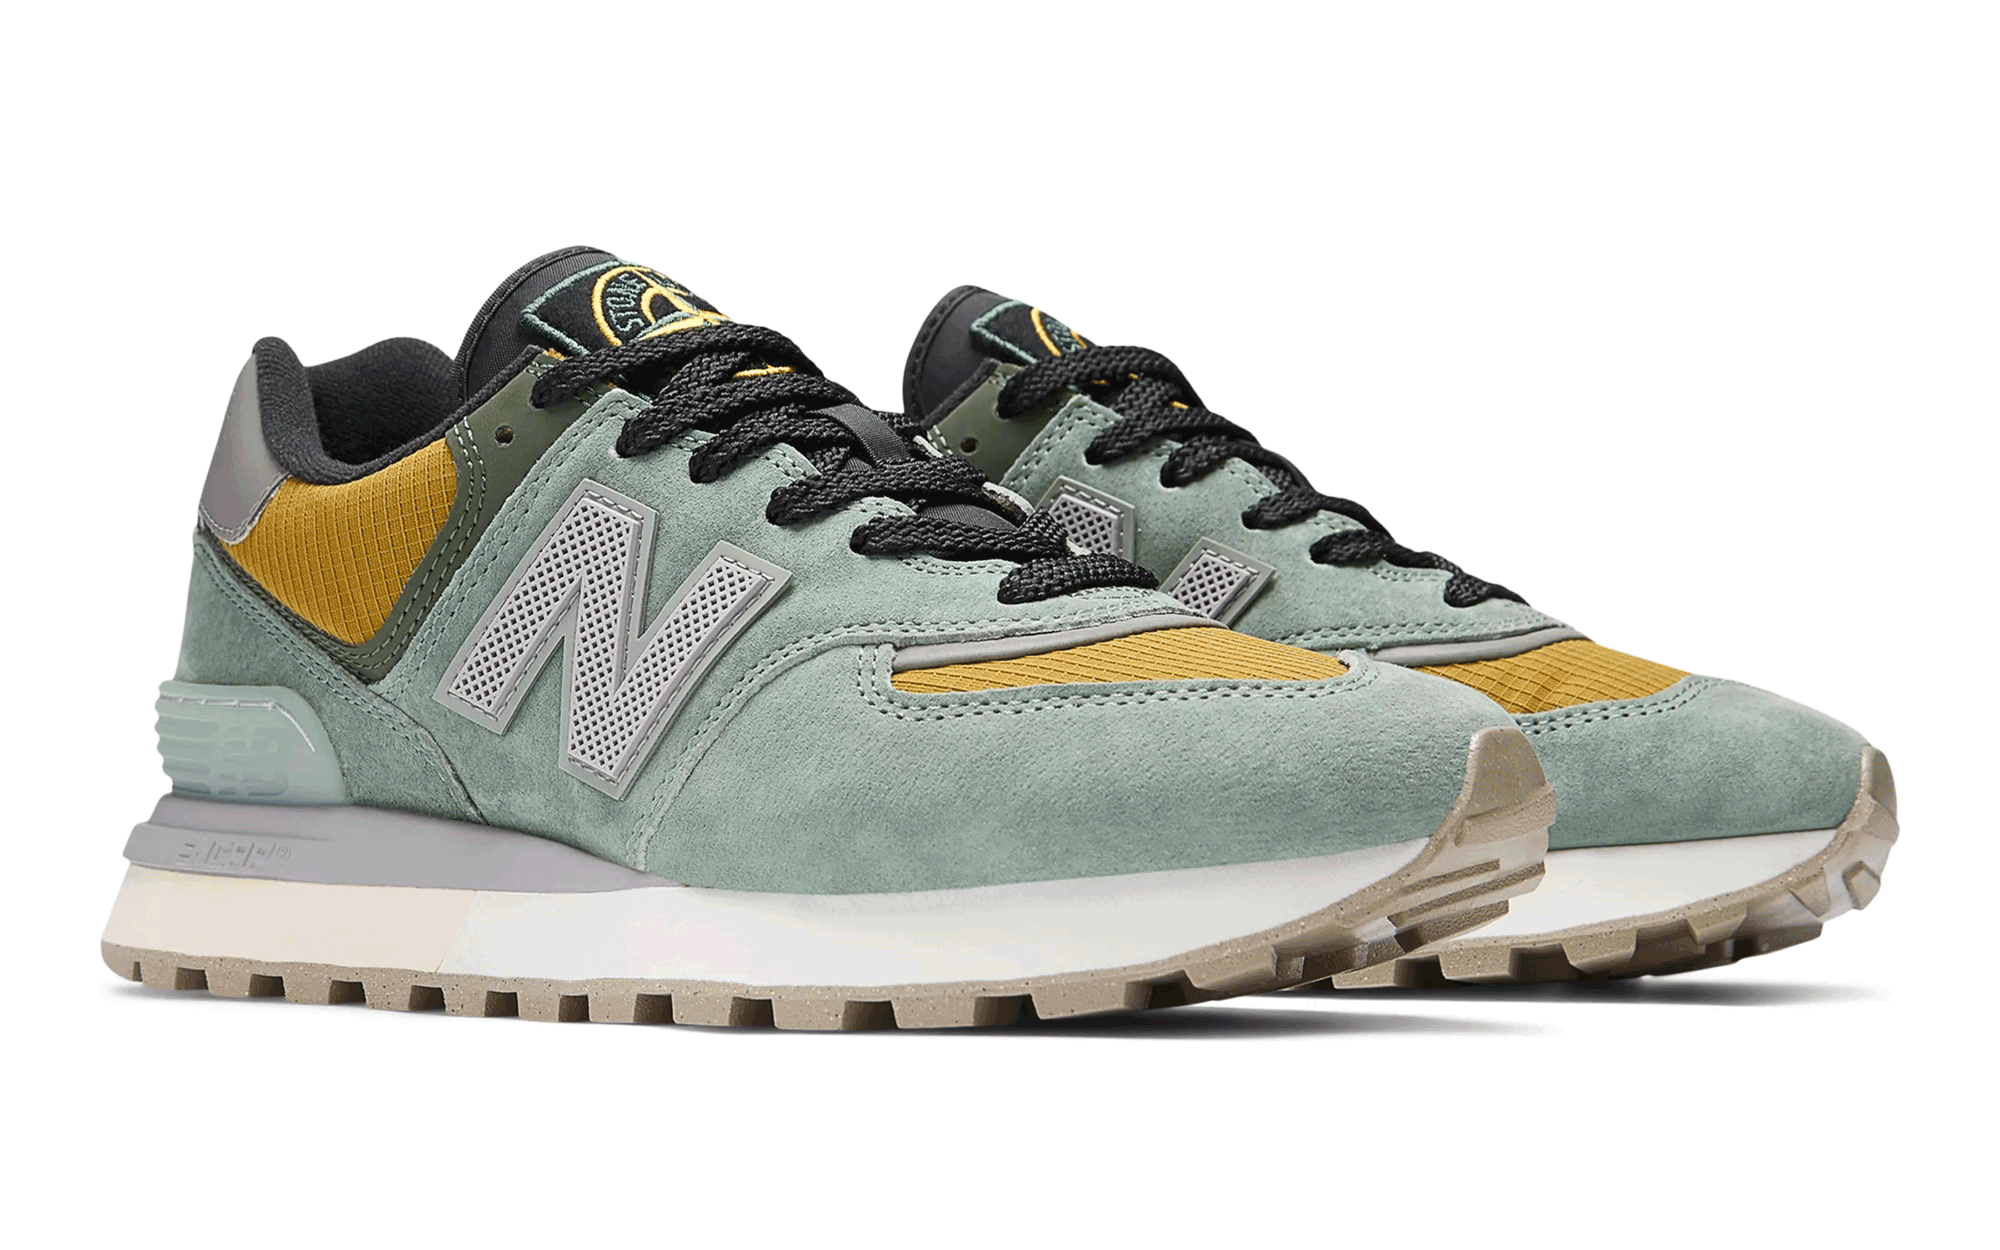 The Stone Island x New Balance 574 Legacy Collection Releases June 14th